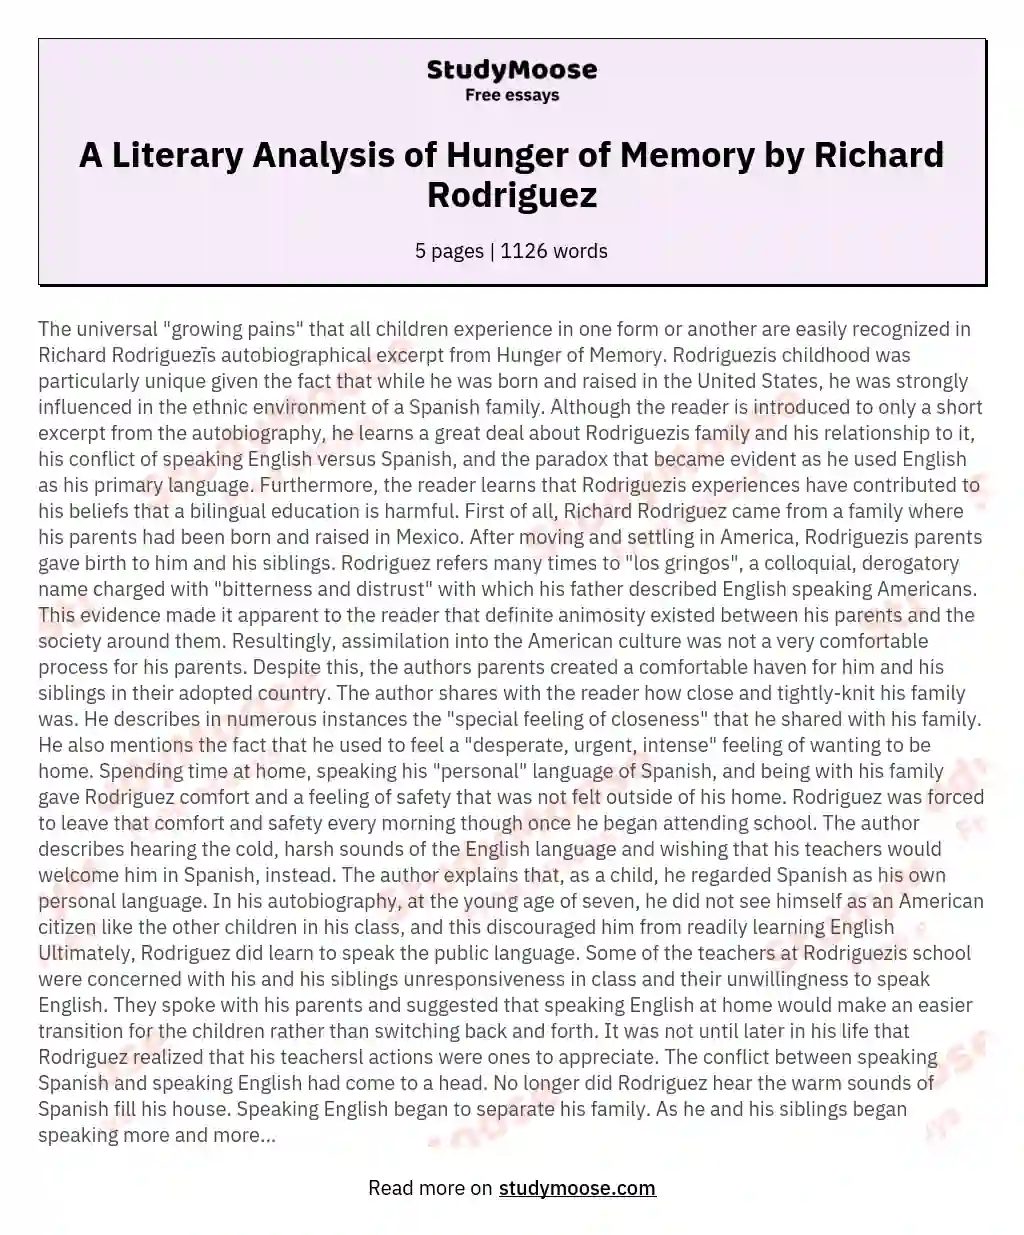 A Literary Analysis of Hunger of Memory by Richard Rodriguez essay